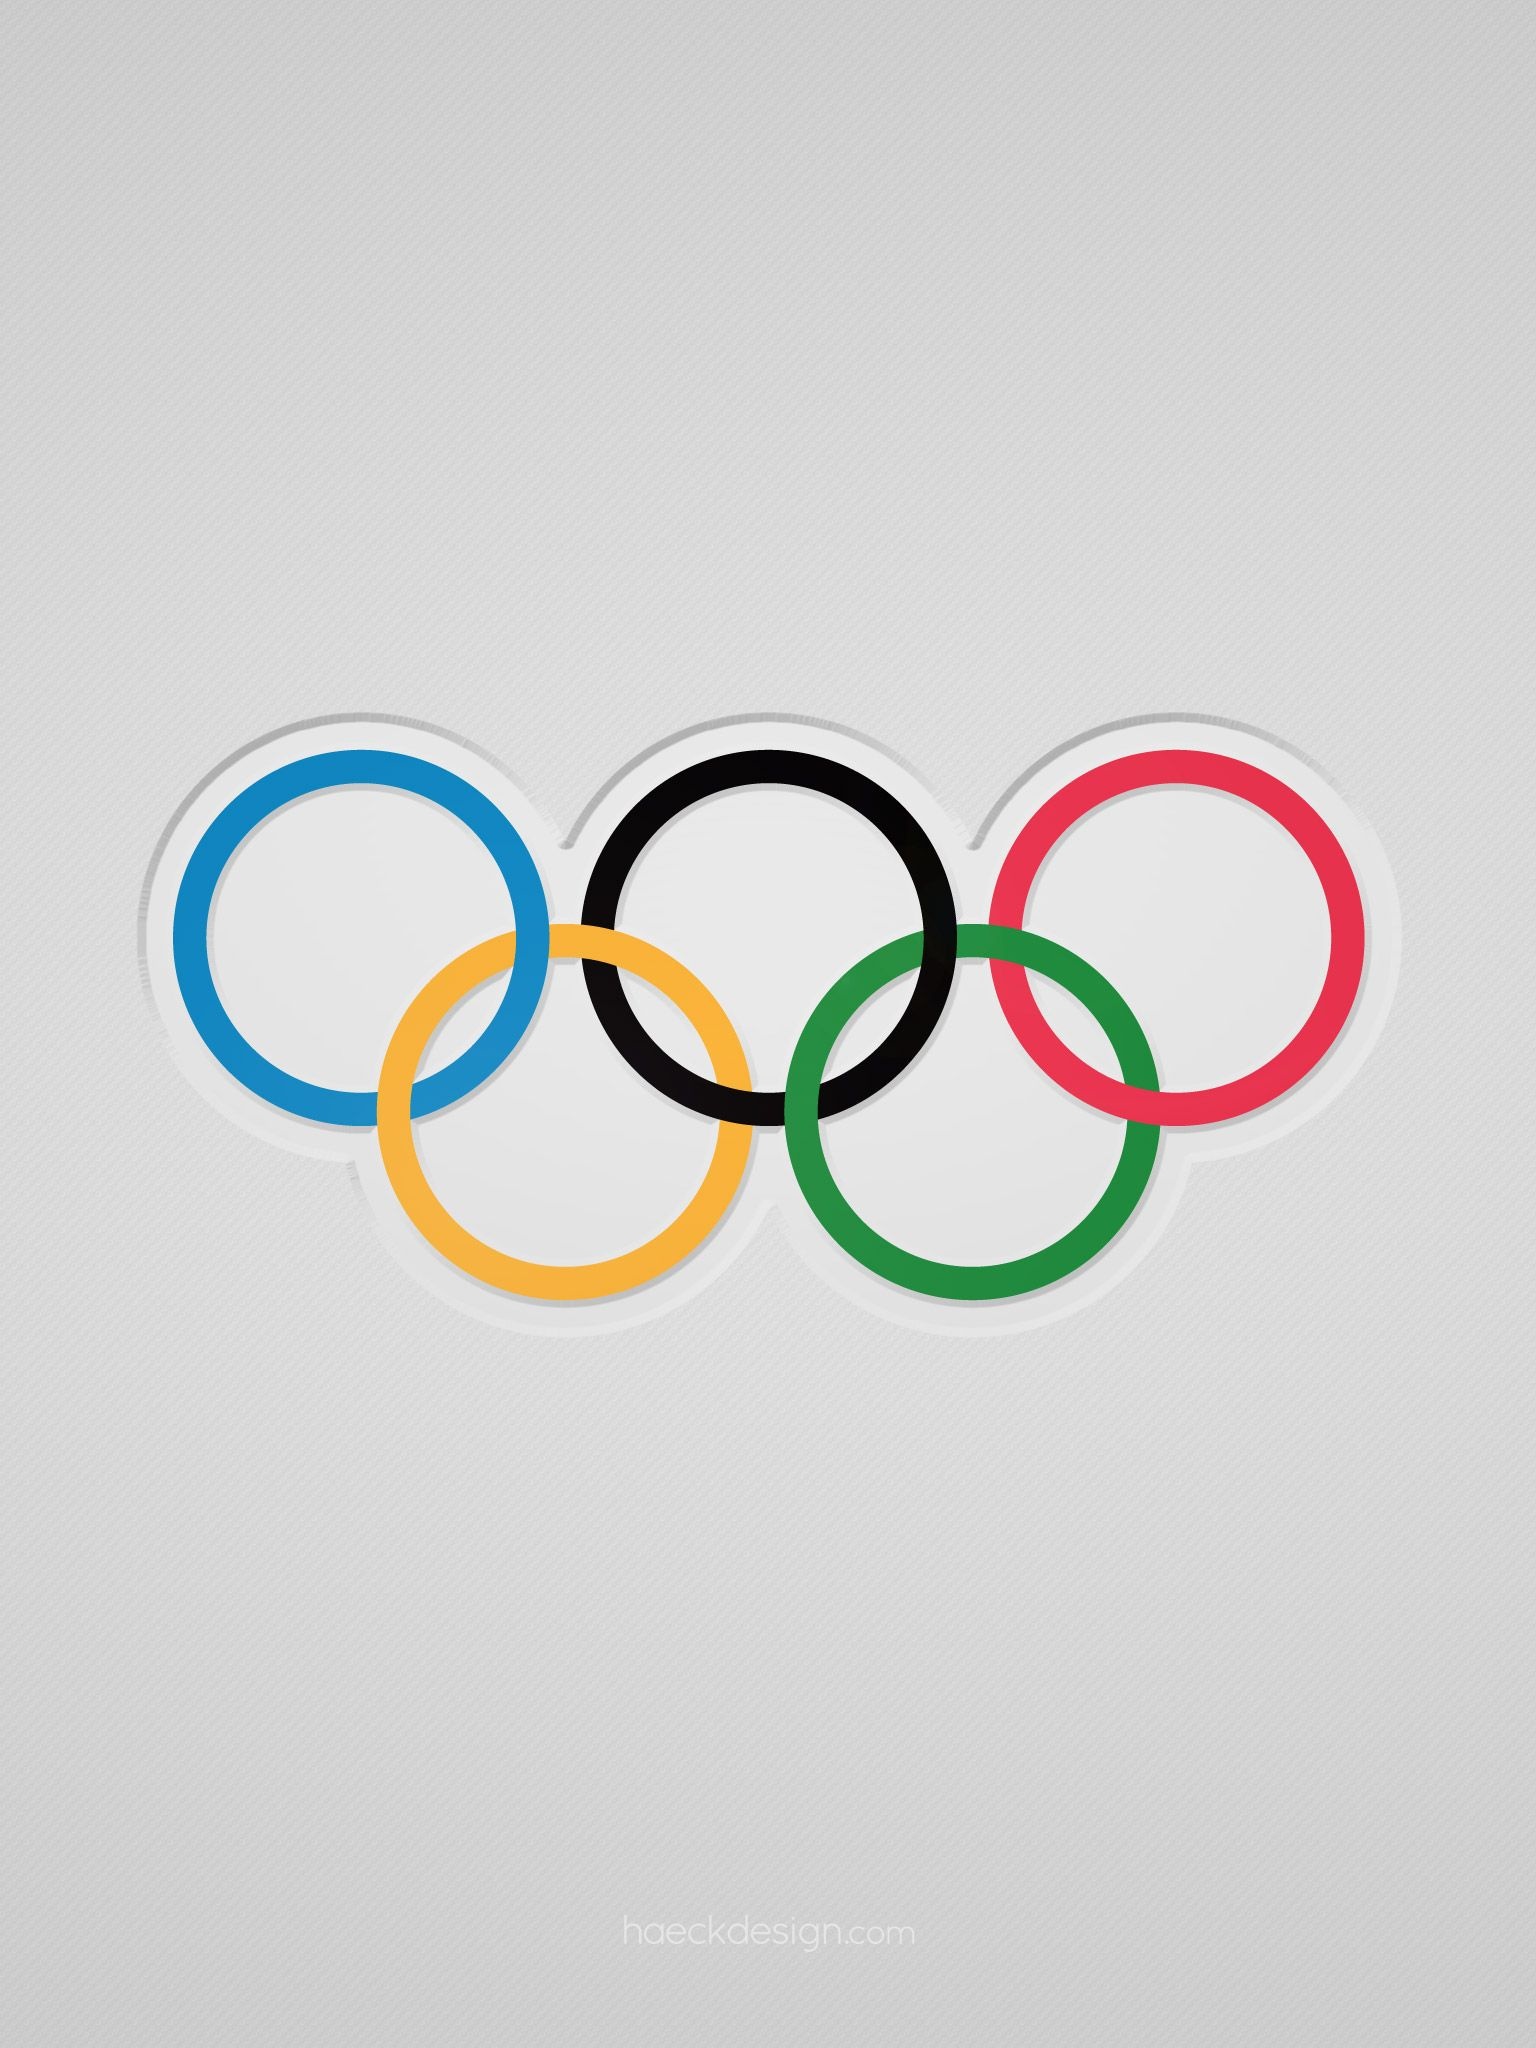 Olympics: The activity of the Olympic Movement, 1913, Introduction of the Olympic rings. 1540x2050 HD Wallpaper.